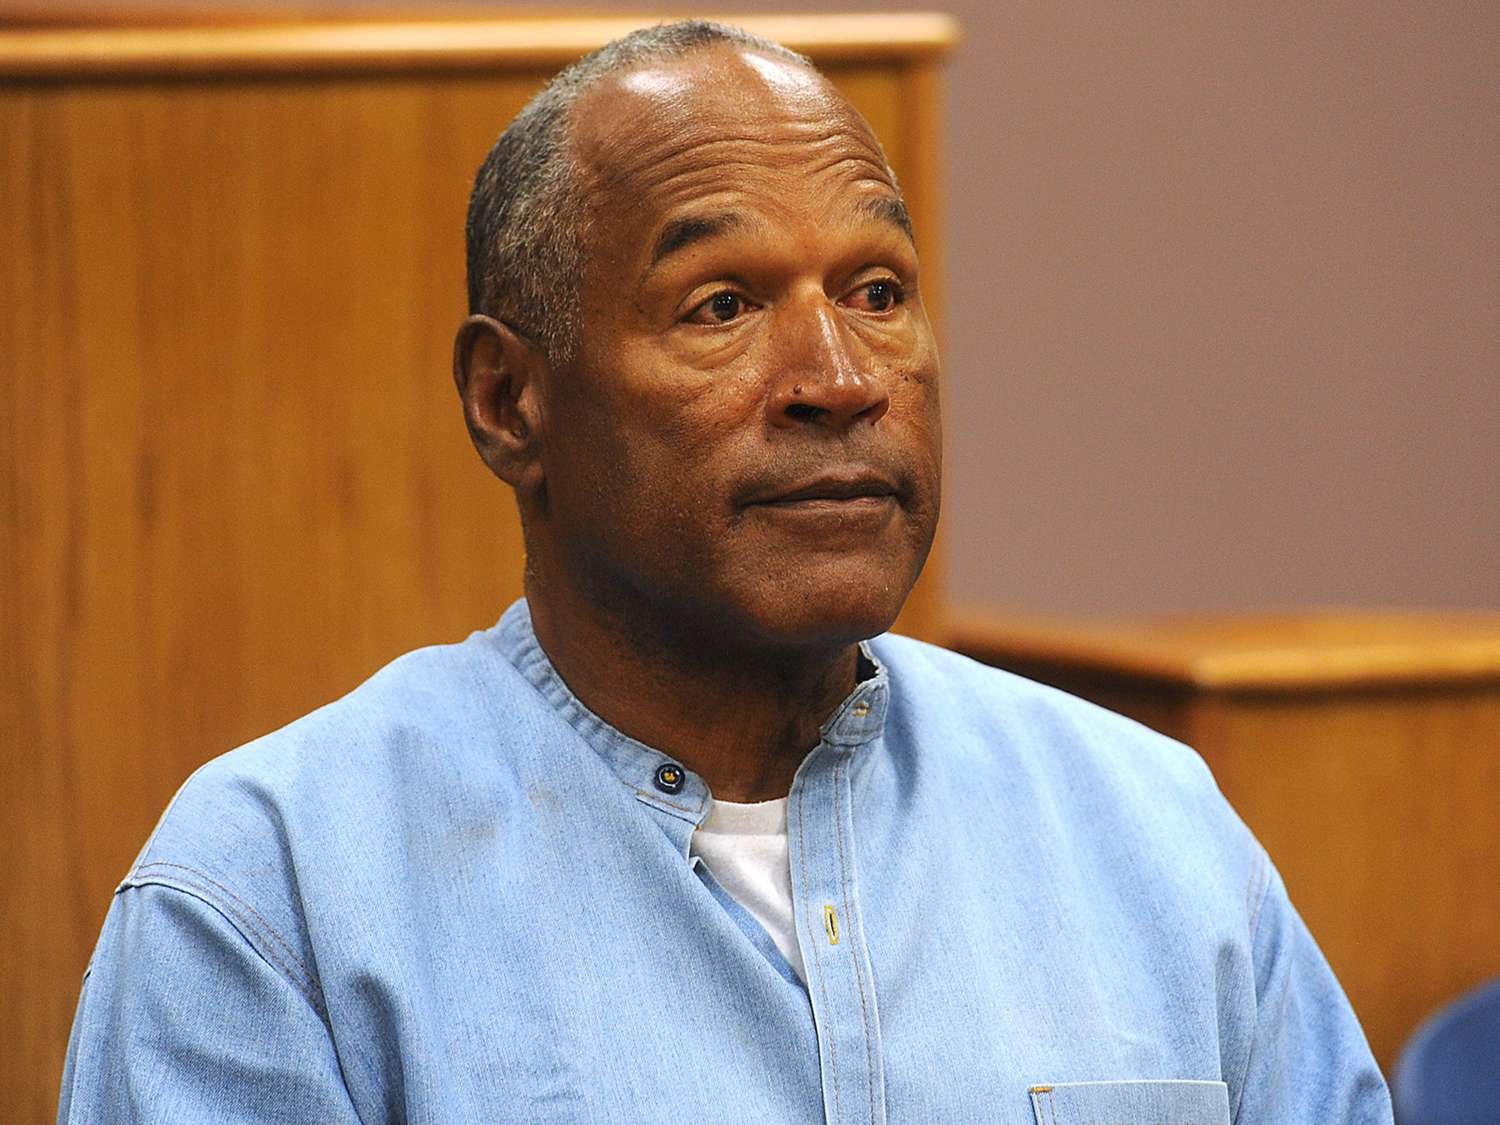 O.J. Simpson, Acquitted in Infamous Murder Trial, Dies at 76 After Cancer Battle